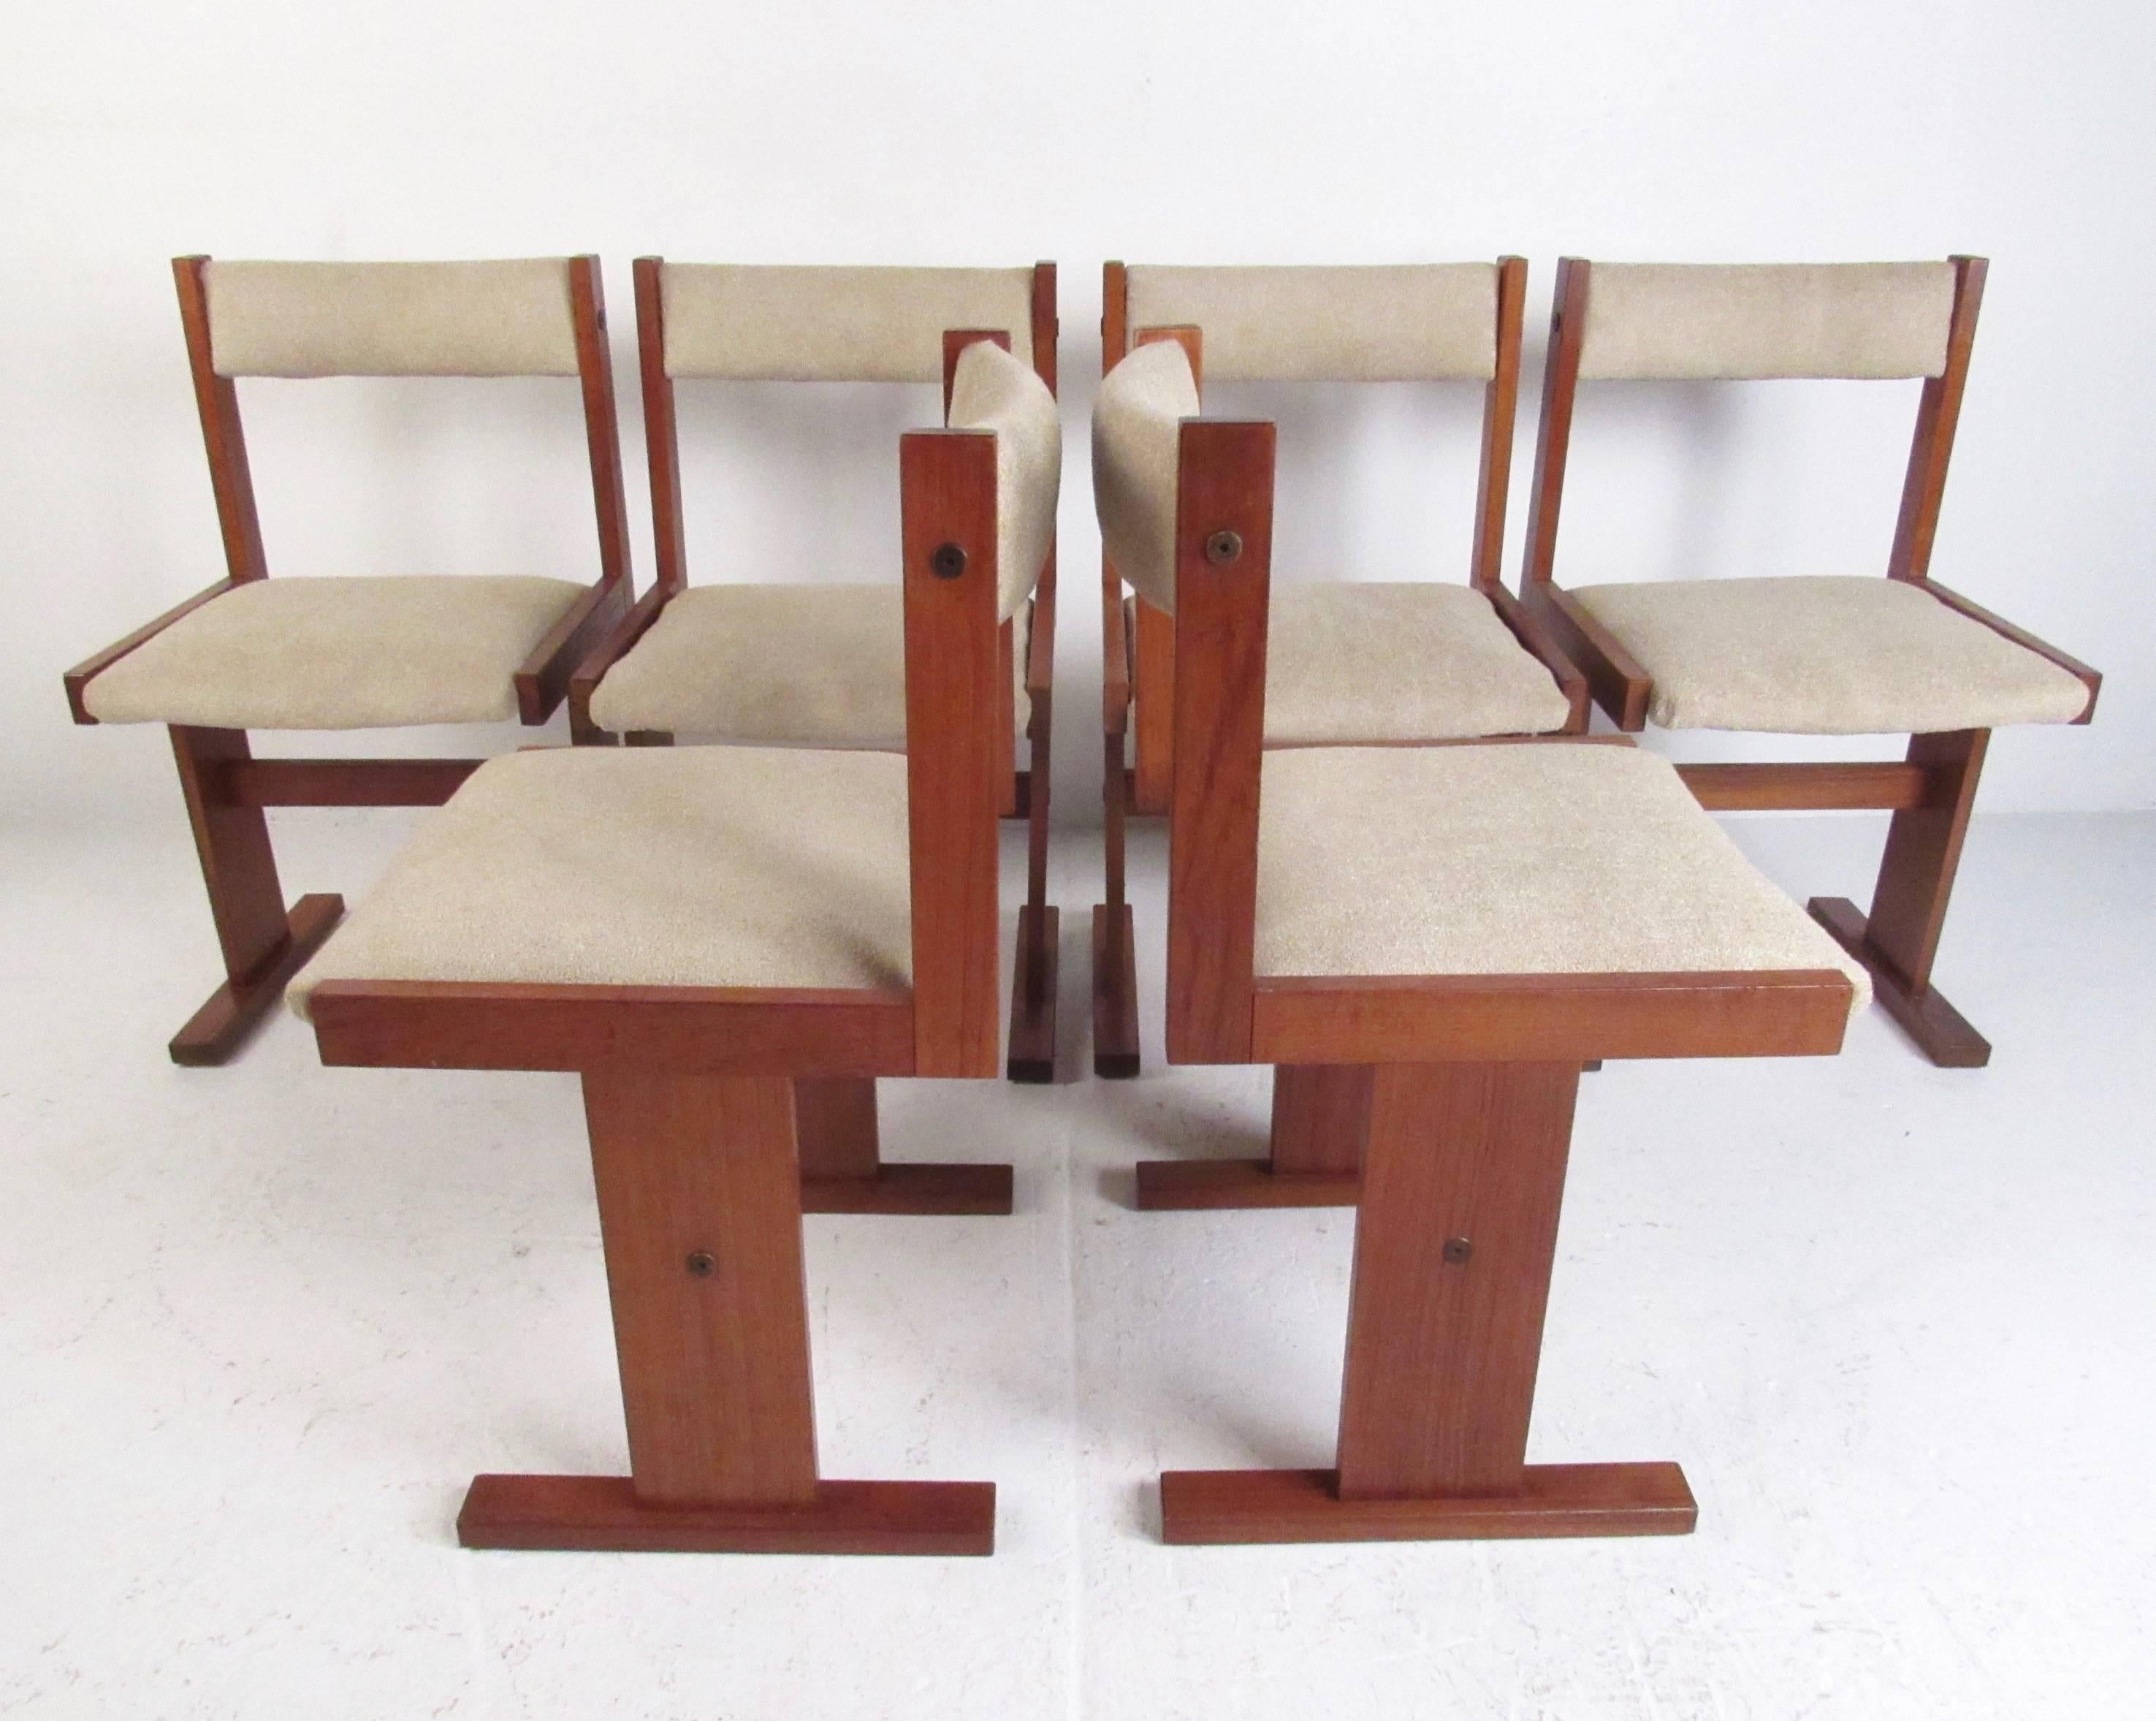 This stylish set of six Danish modern dining chairs feature sturdy teak construction with upholstered seats and seat backs. The unique two leg design and Mid-Century design of the pair make these a beautiful addition to any Scandinavian Modern